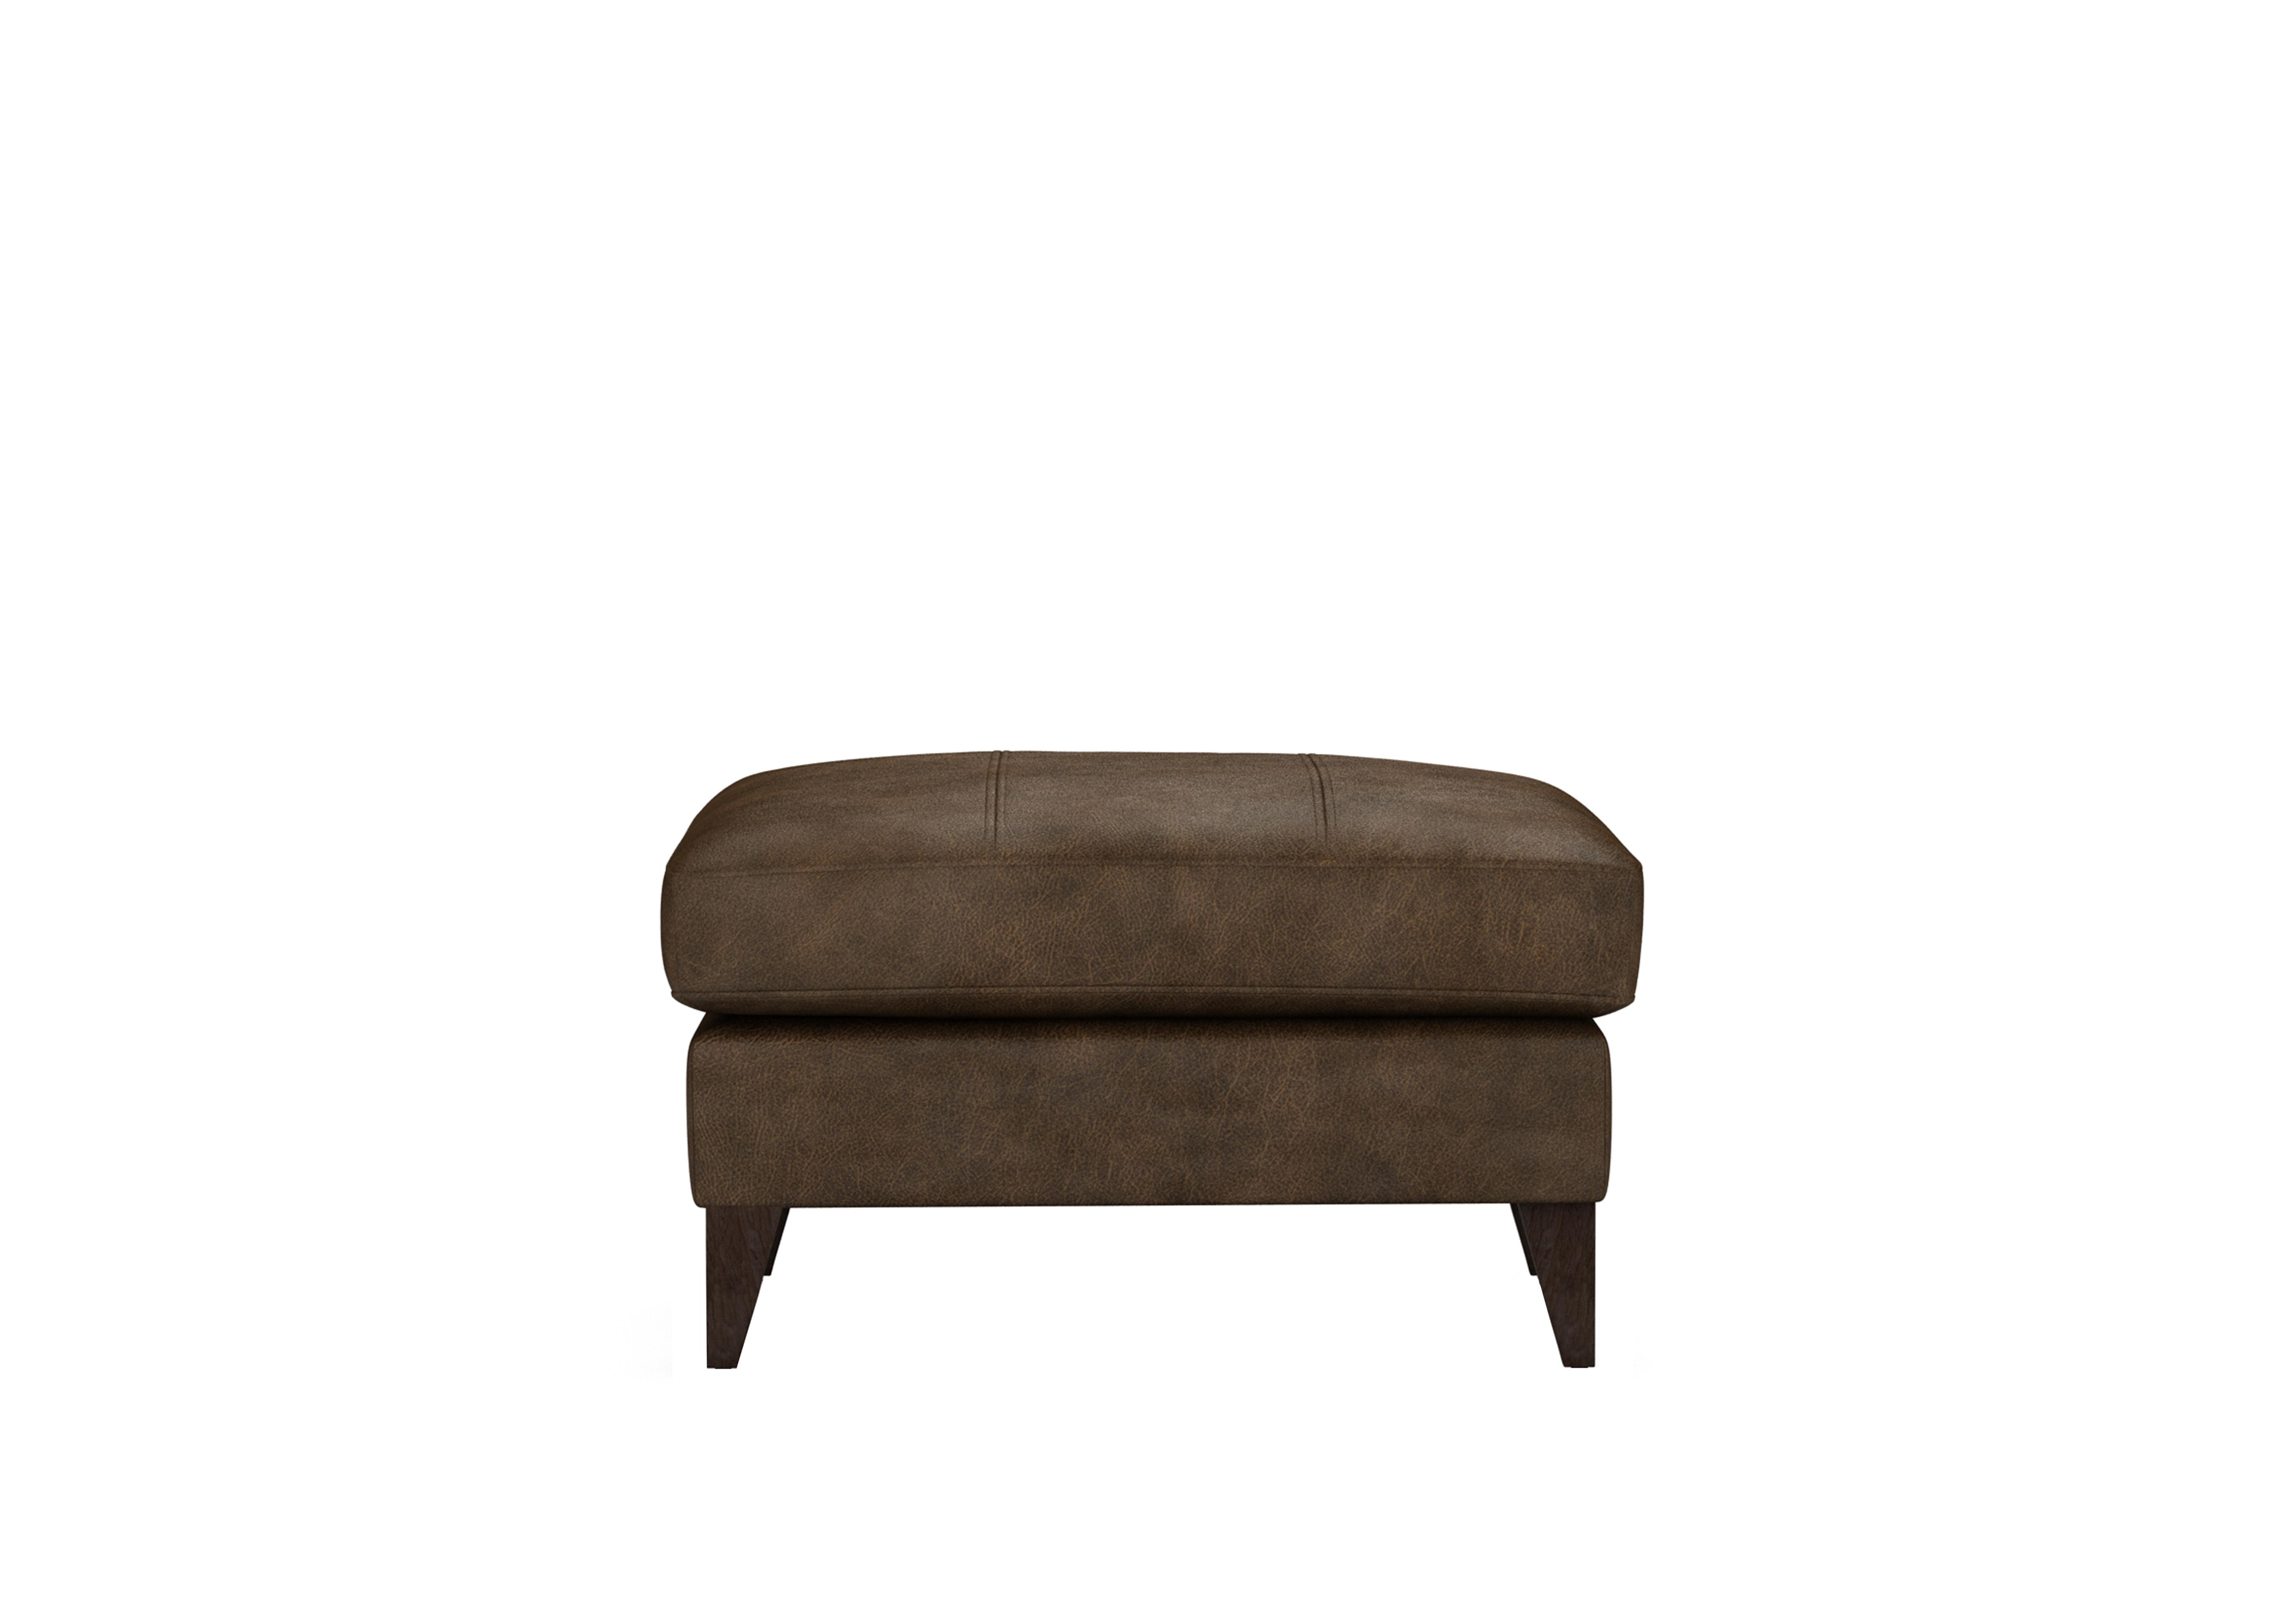 Romilly Leather Footstool in Bou192 Bourbon Wa Ft on Furniture Village